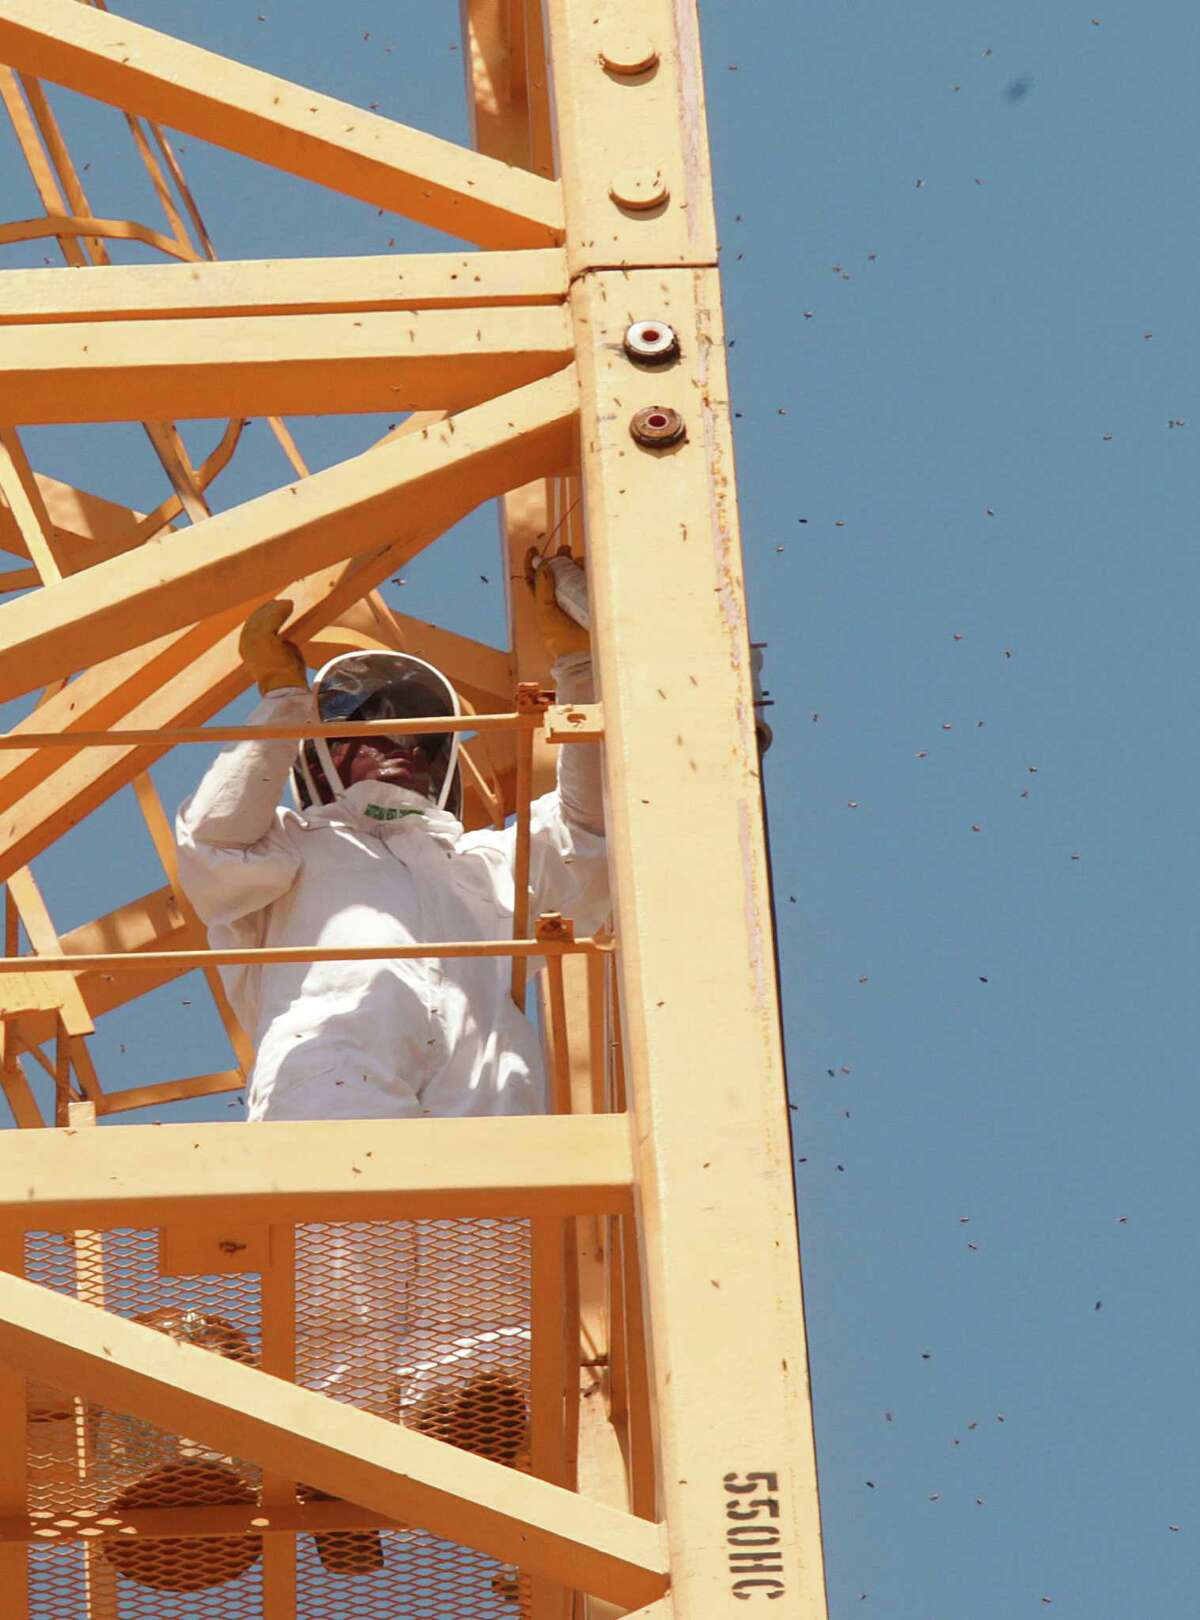 A Gotcha Pest Control technician treats the area where bees were found making a home inside the pipes of a crane at a high rise construction site along 5300 block of Brownway St. in the Galleria area on Wednesday, May 16, 2012, in Houston.